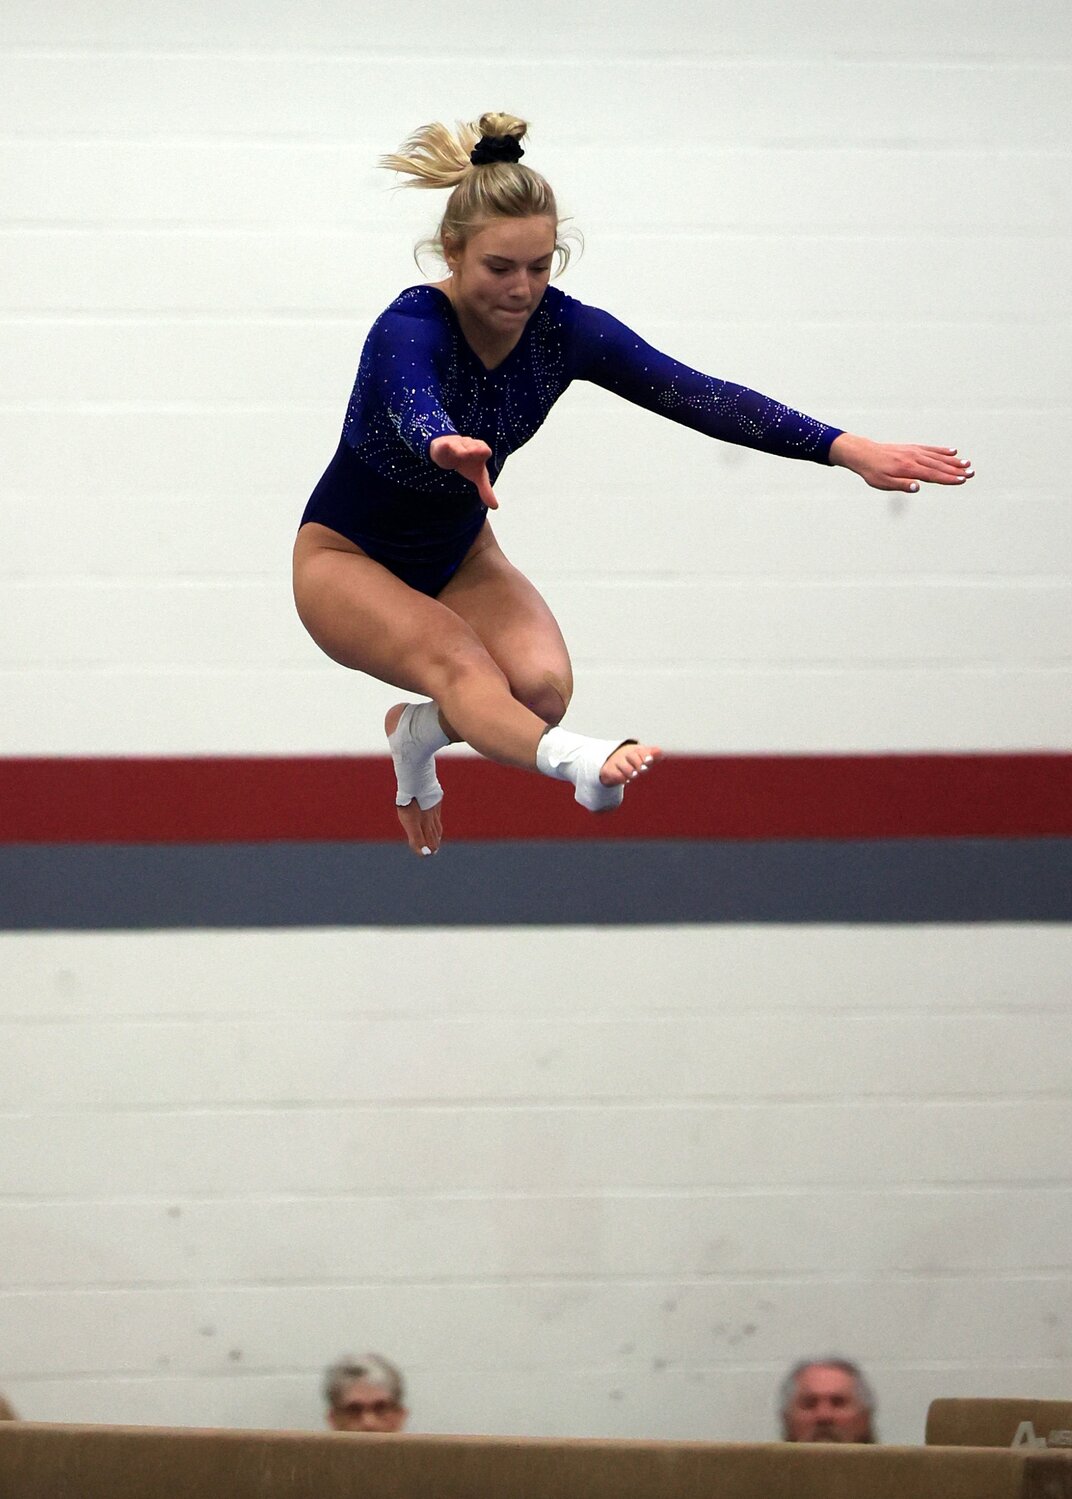 North Putnam's Barbie Fuchs is the first gymnast in North Putnam school history and was invited to compete with the three county schools on Monday.